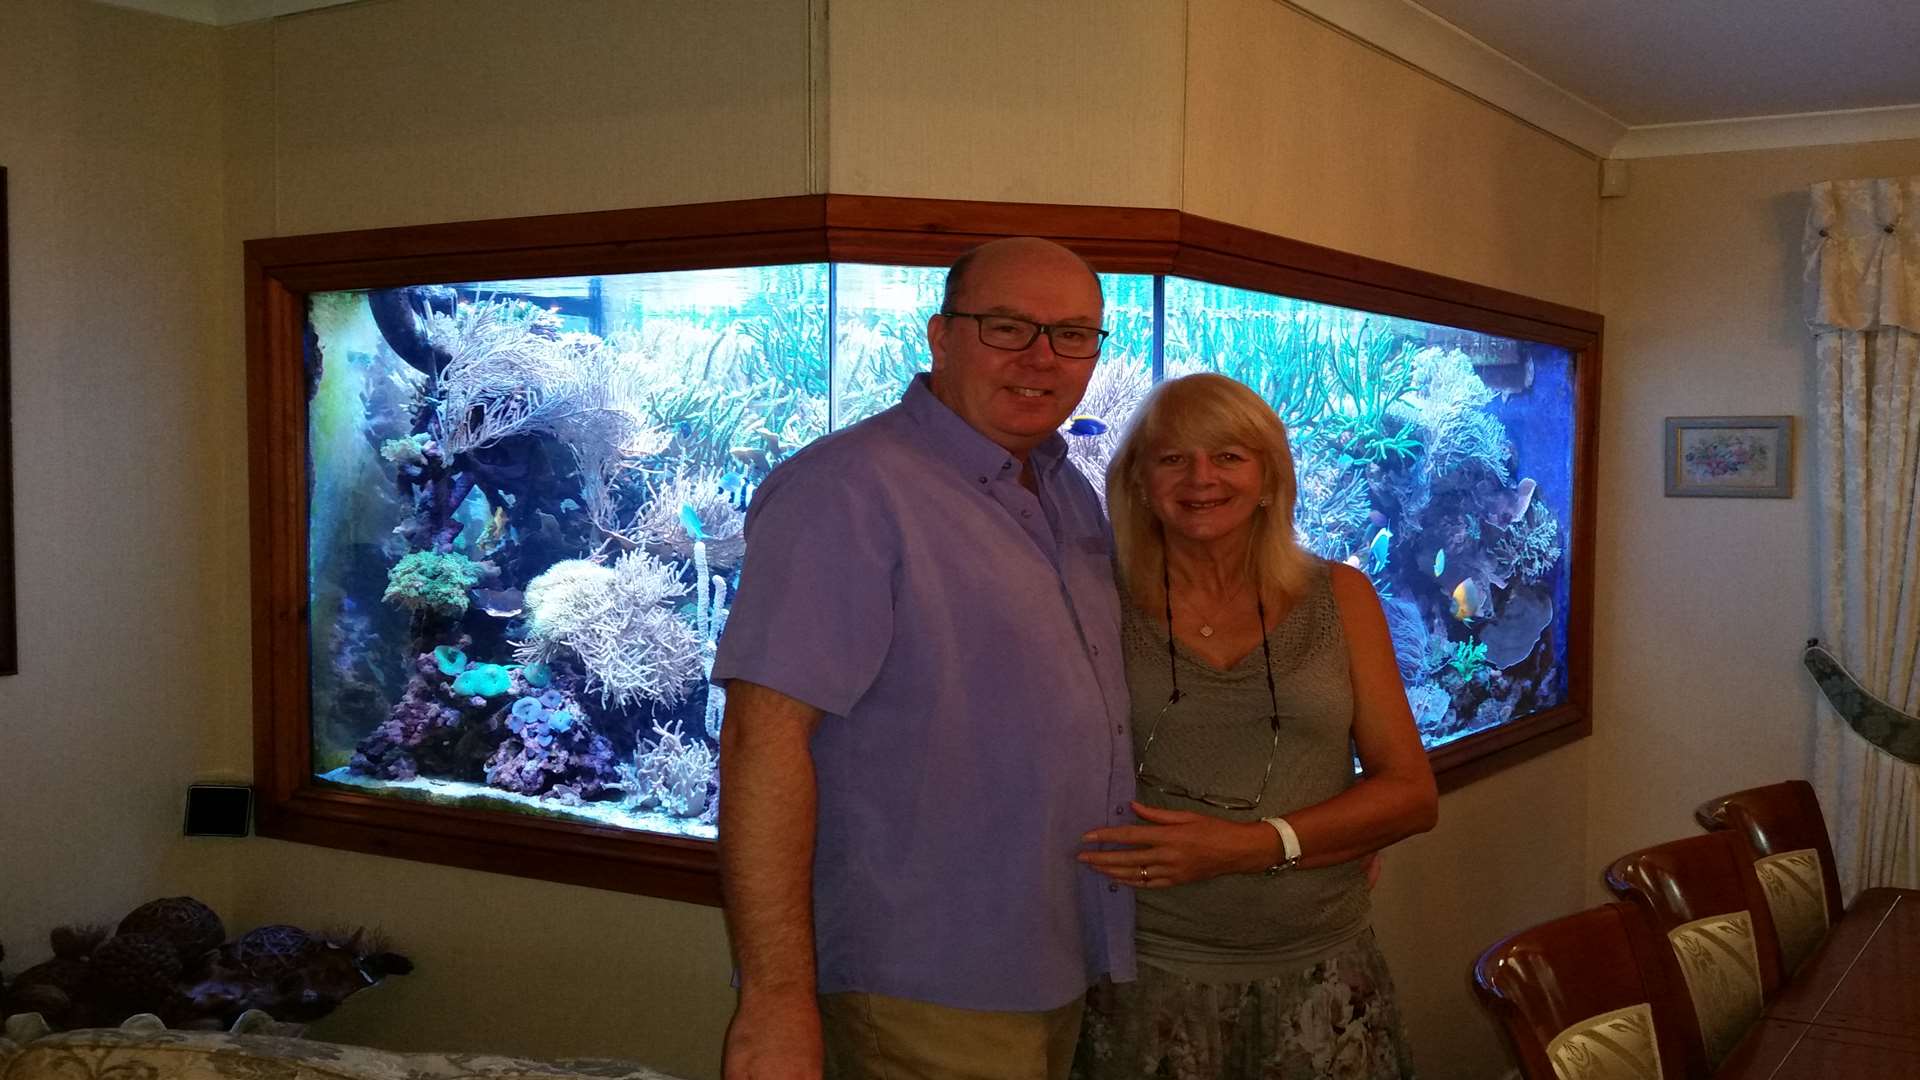 Martin and Kay Lakin with the fish tank at their home in King Arthur's Drive.